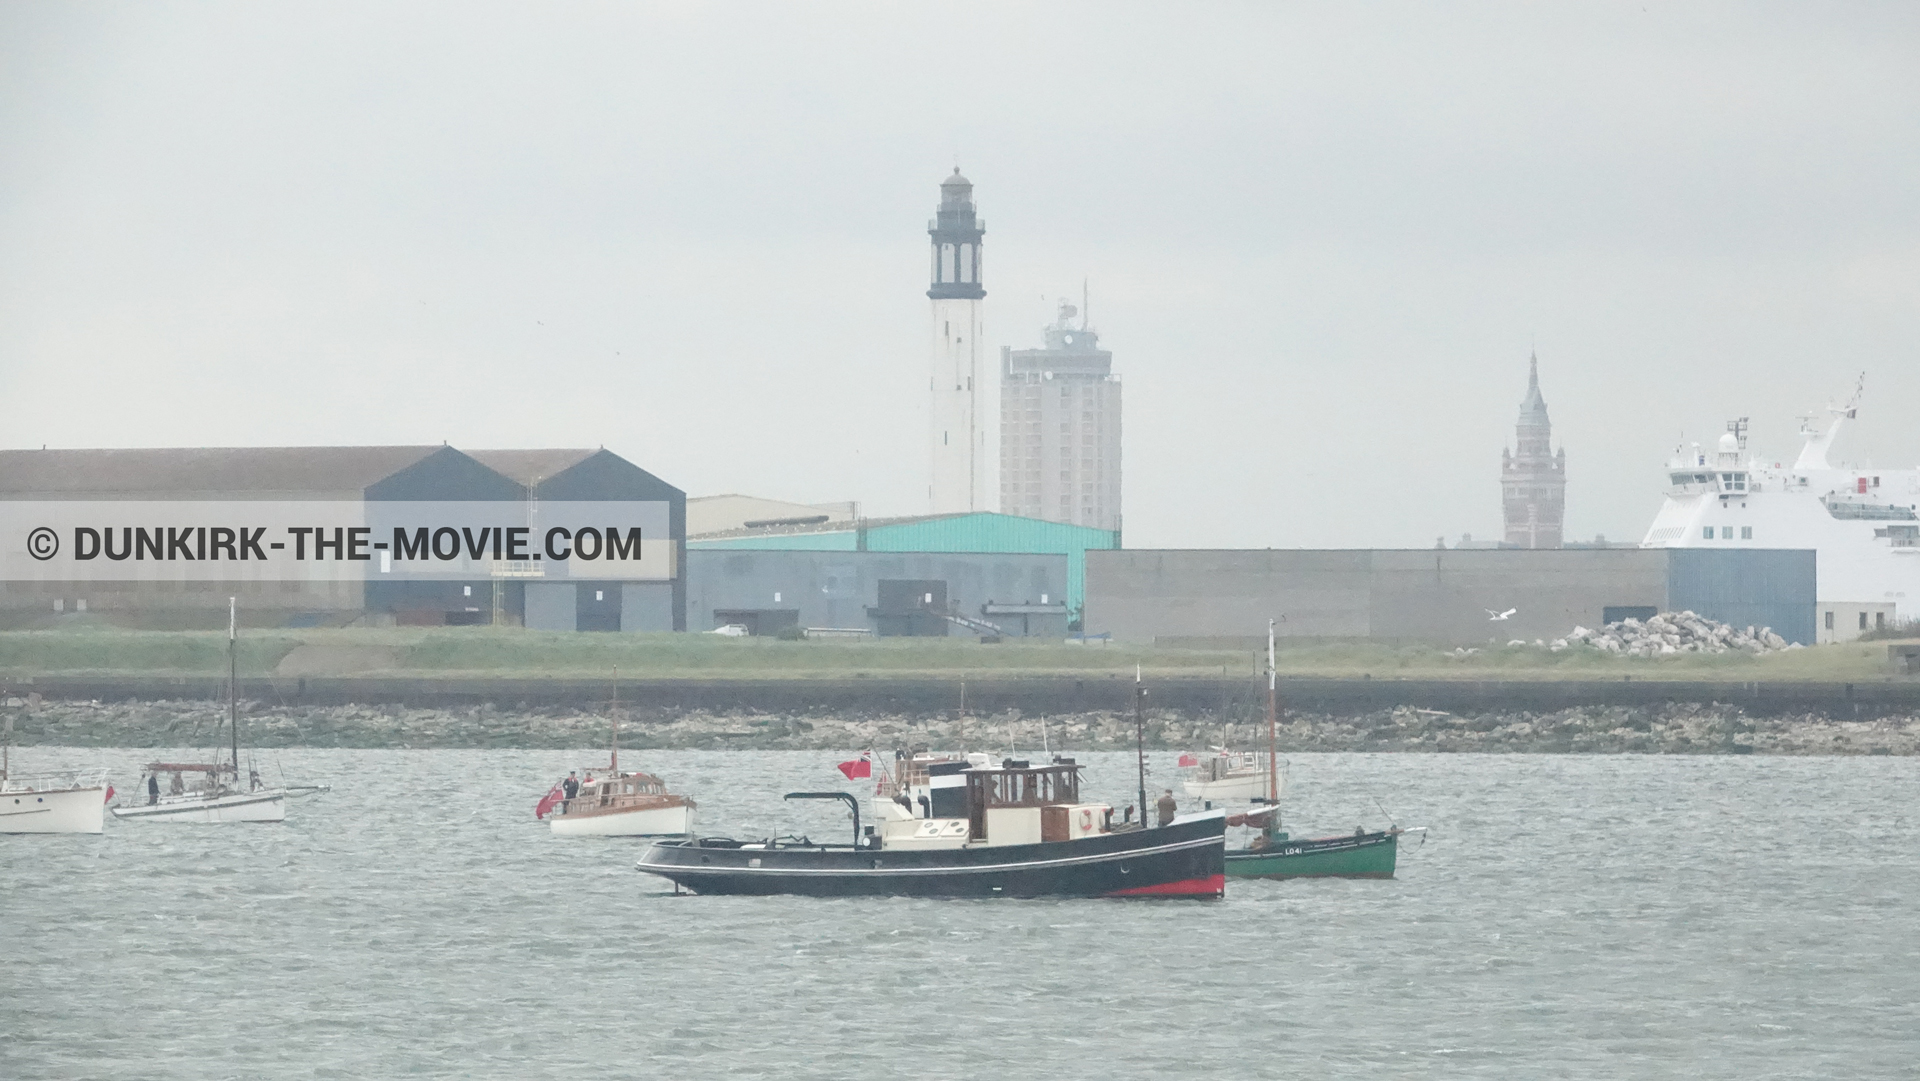 Picture with boat, Dunkirk lighthouse,  from behind the scene of the Dunkirk movie by Nolan